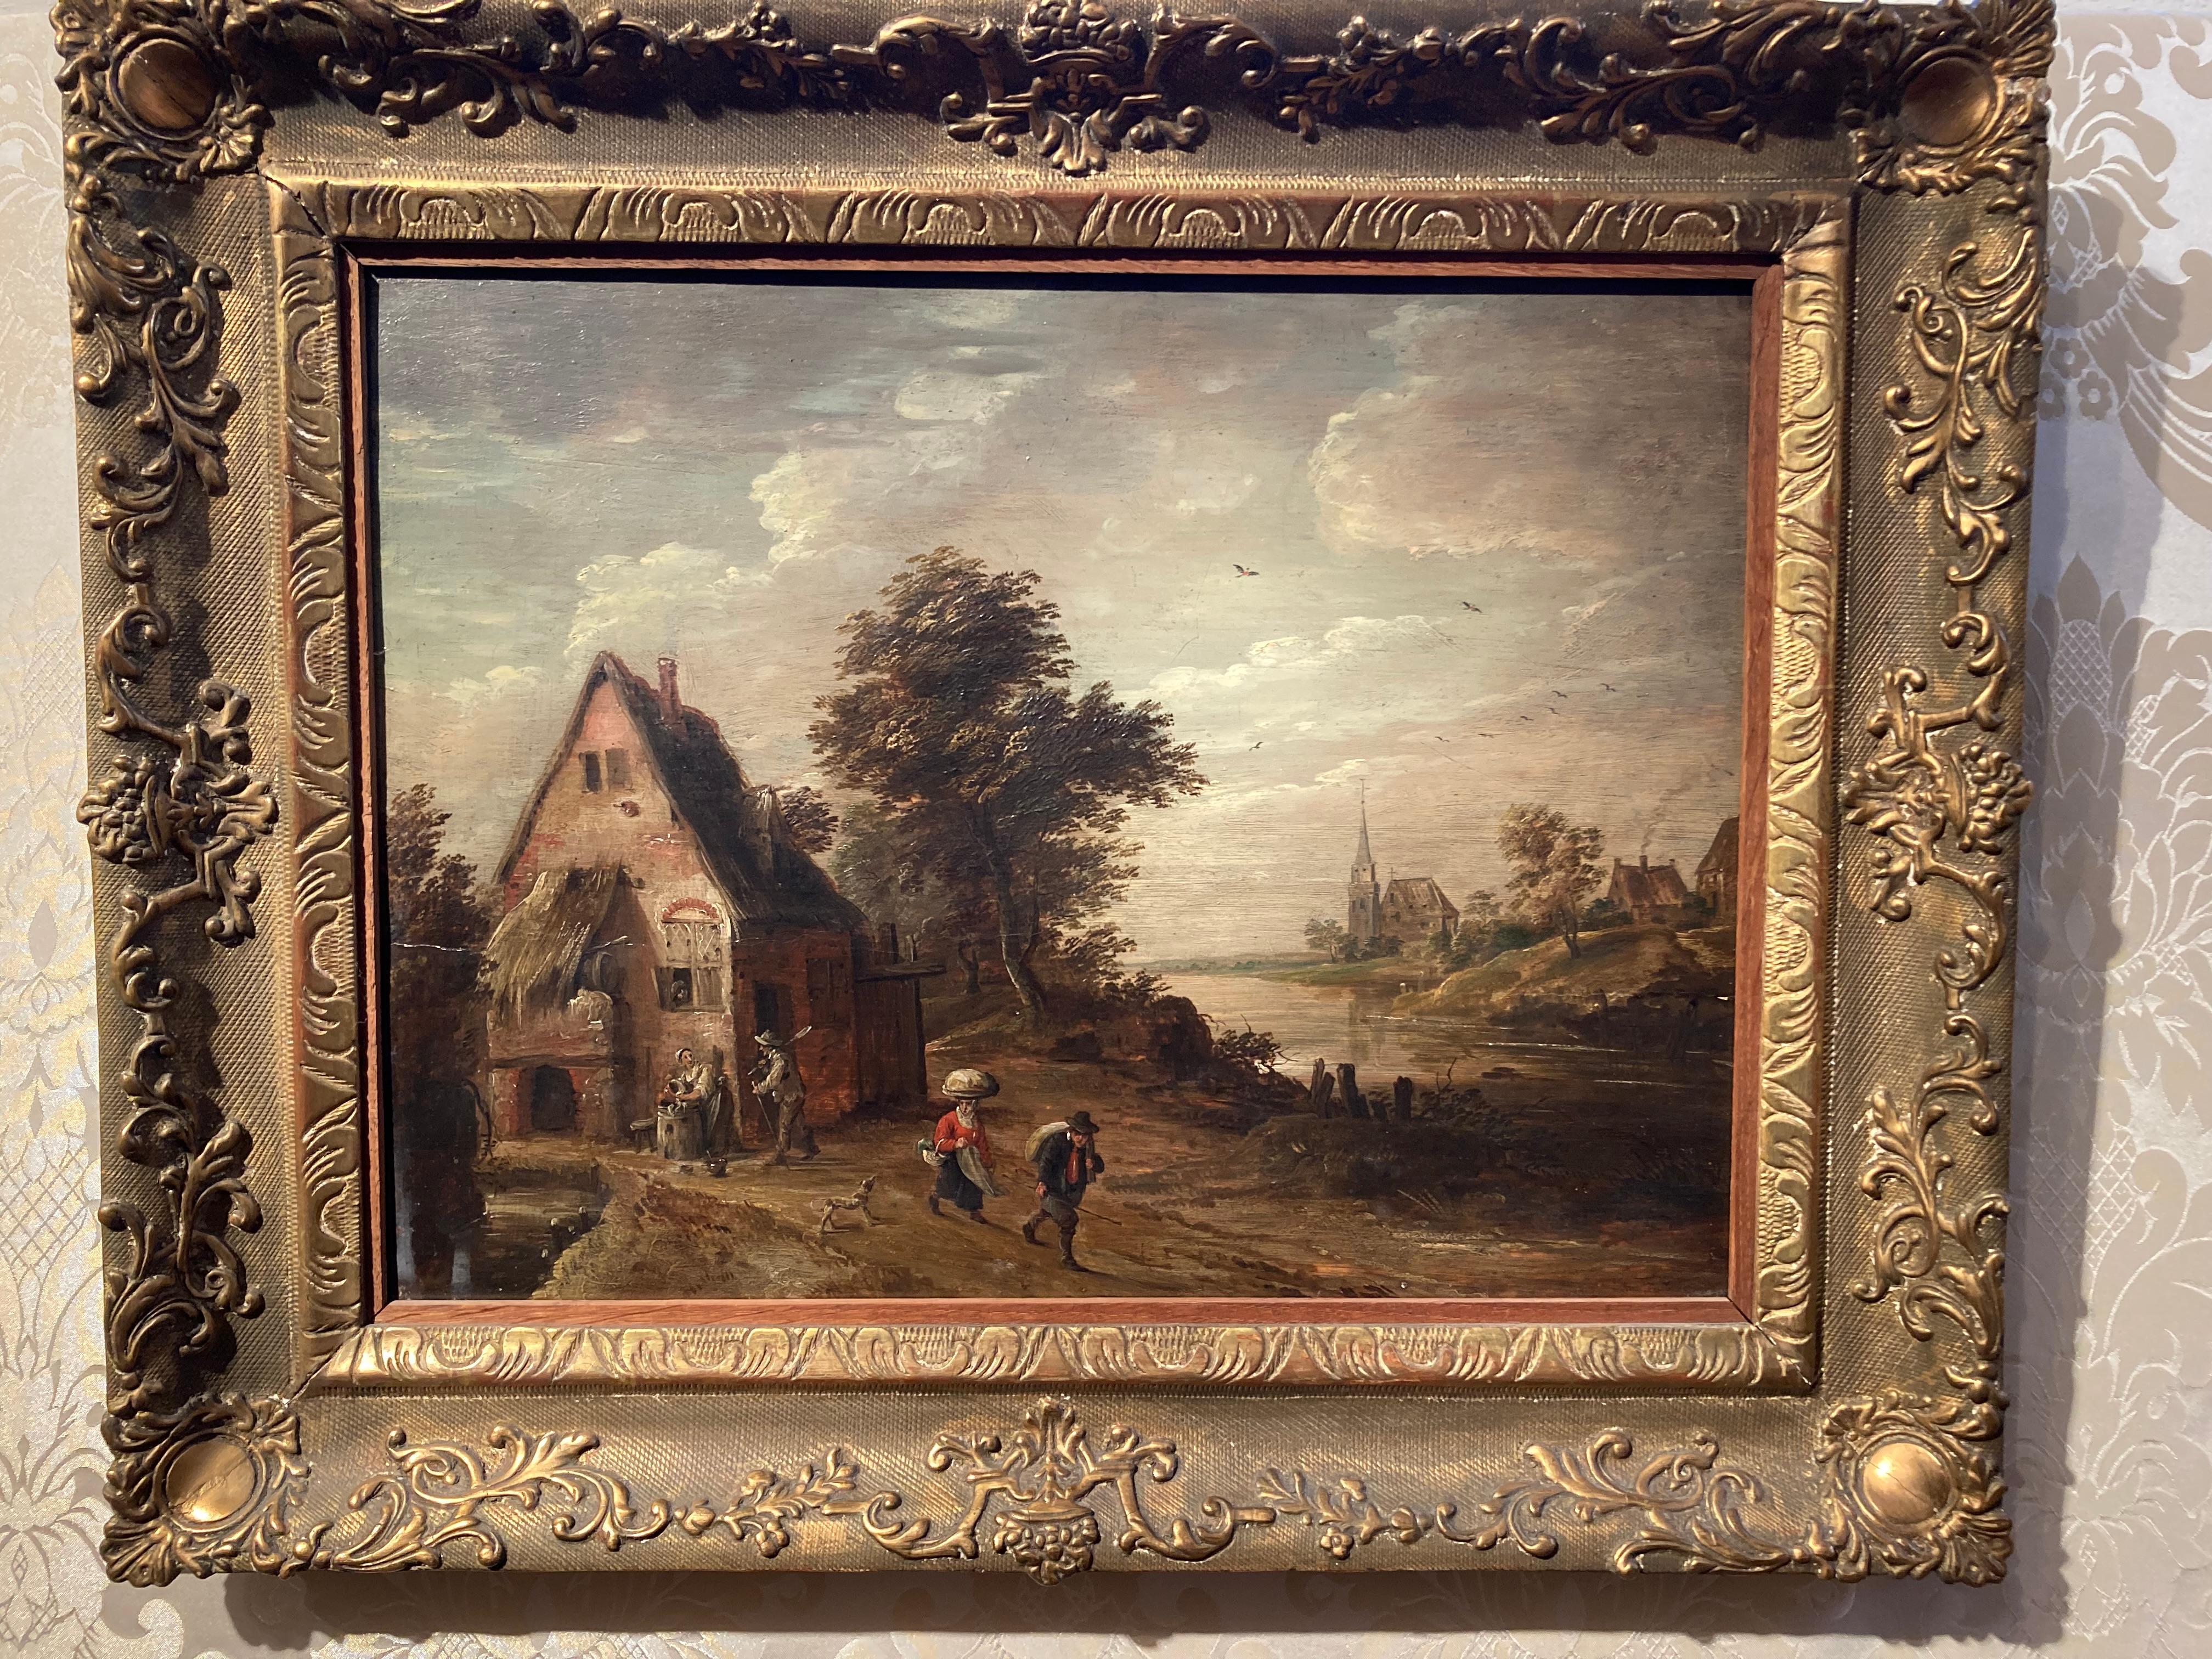 Circle of David Teniers, Landscape with Peasants by an Inn and a River, Dutch  - Painting by David Teniers the Younger